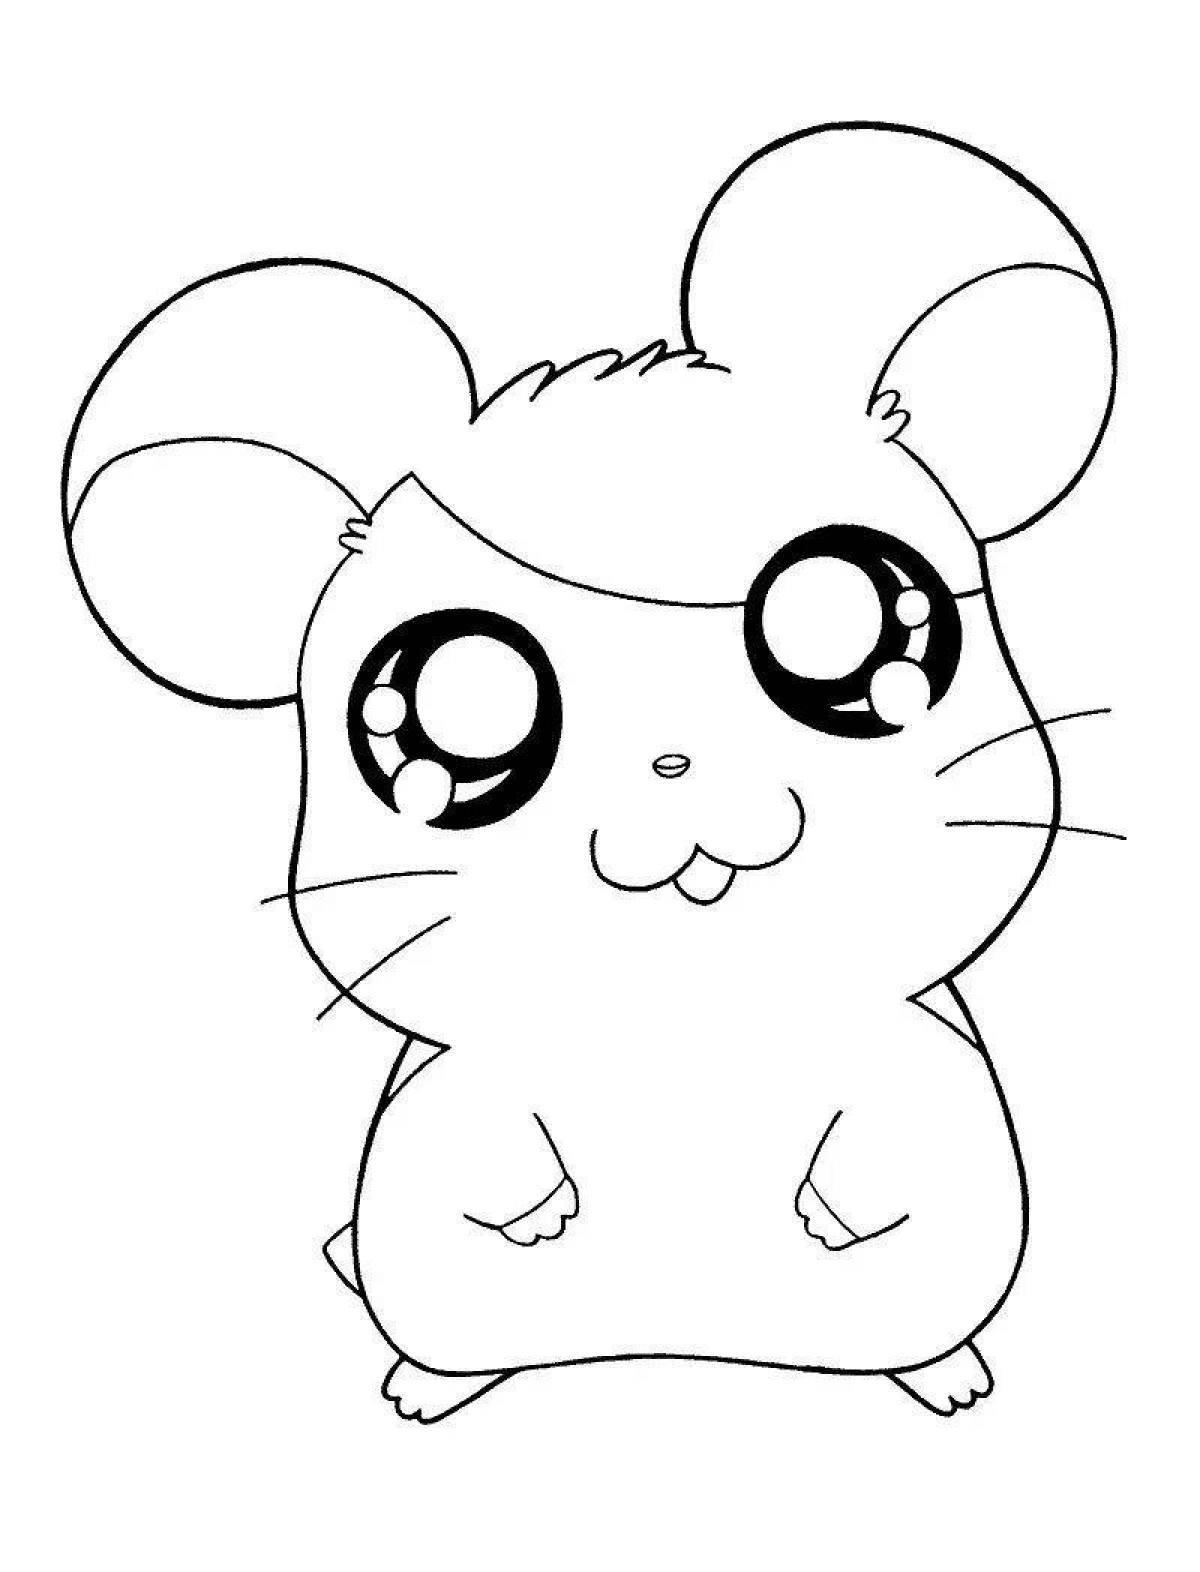 Cute coloring pages for girls 12 years old animals